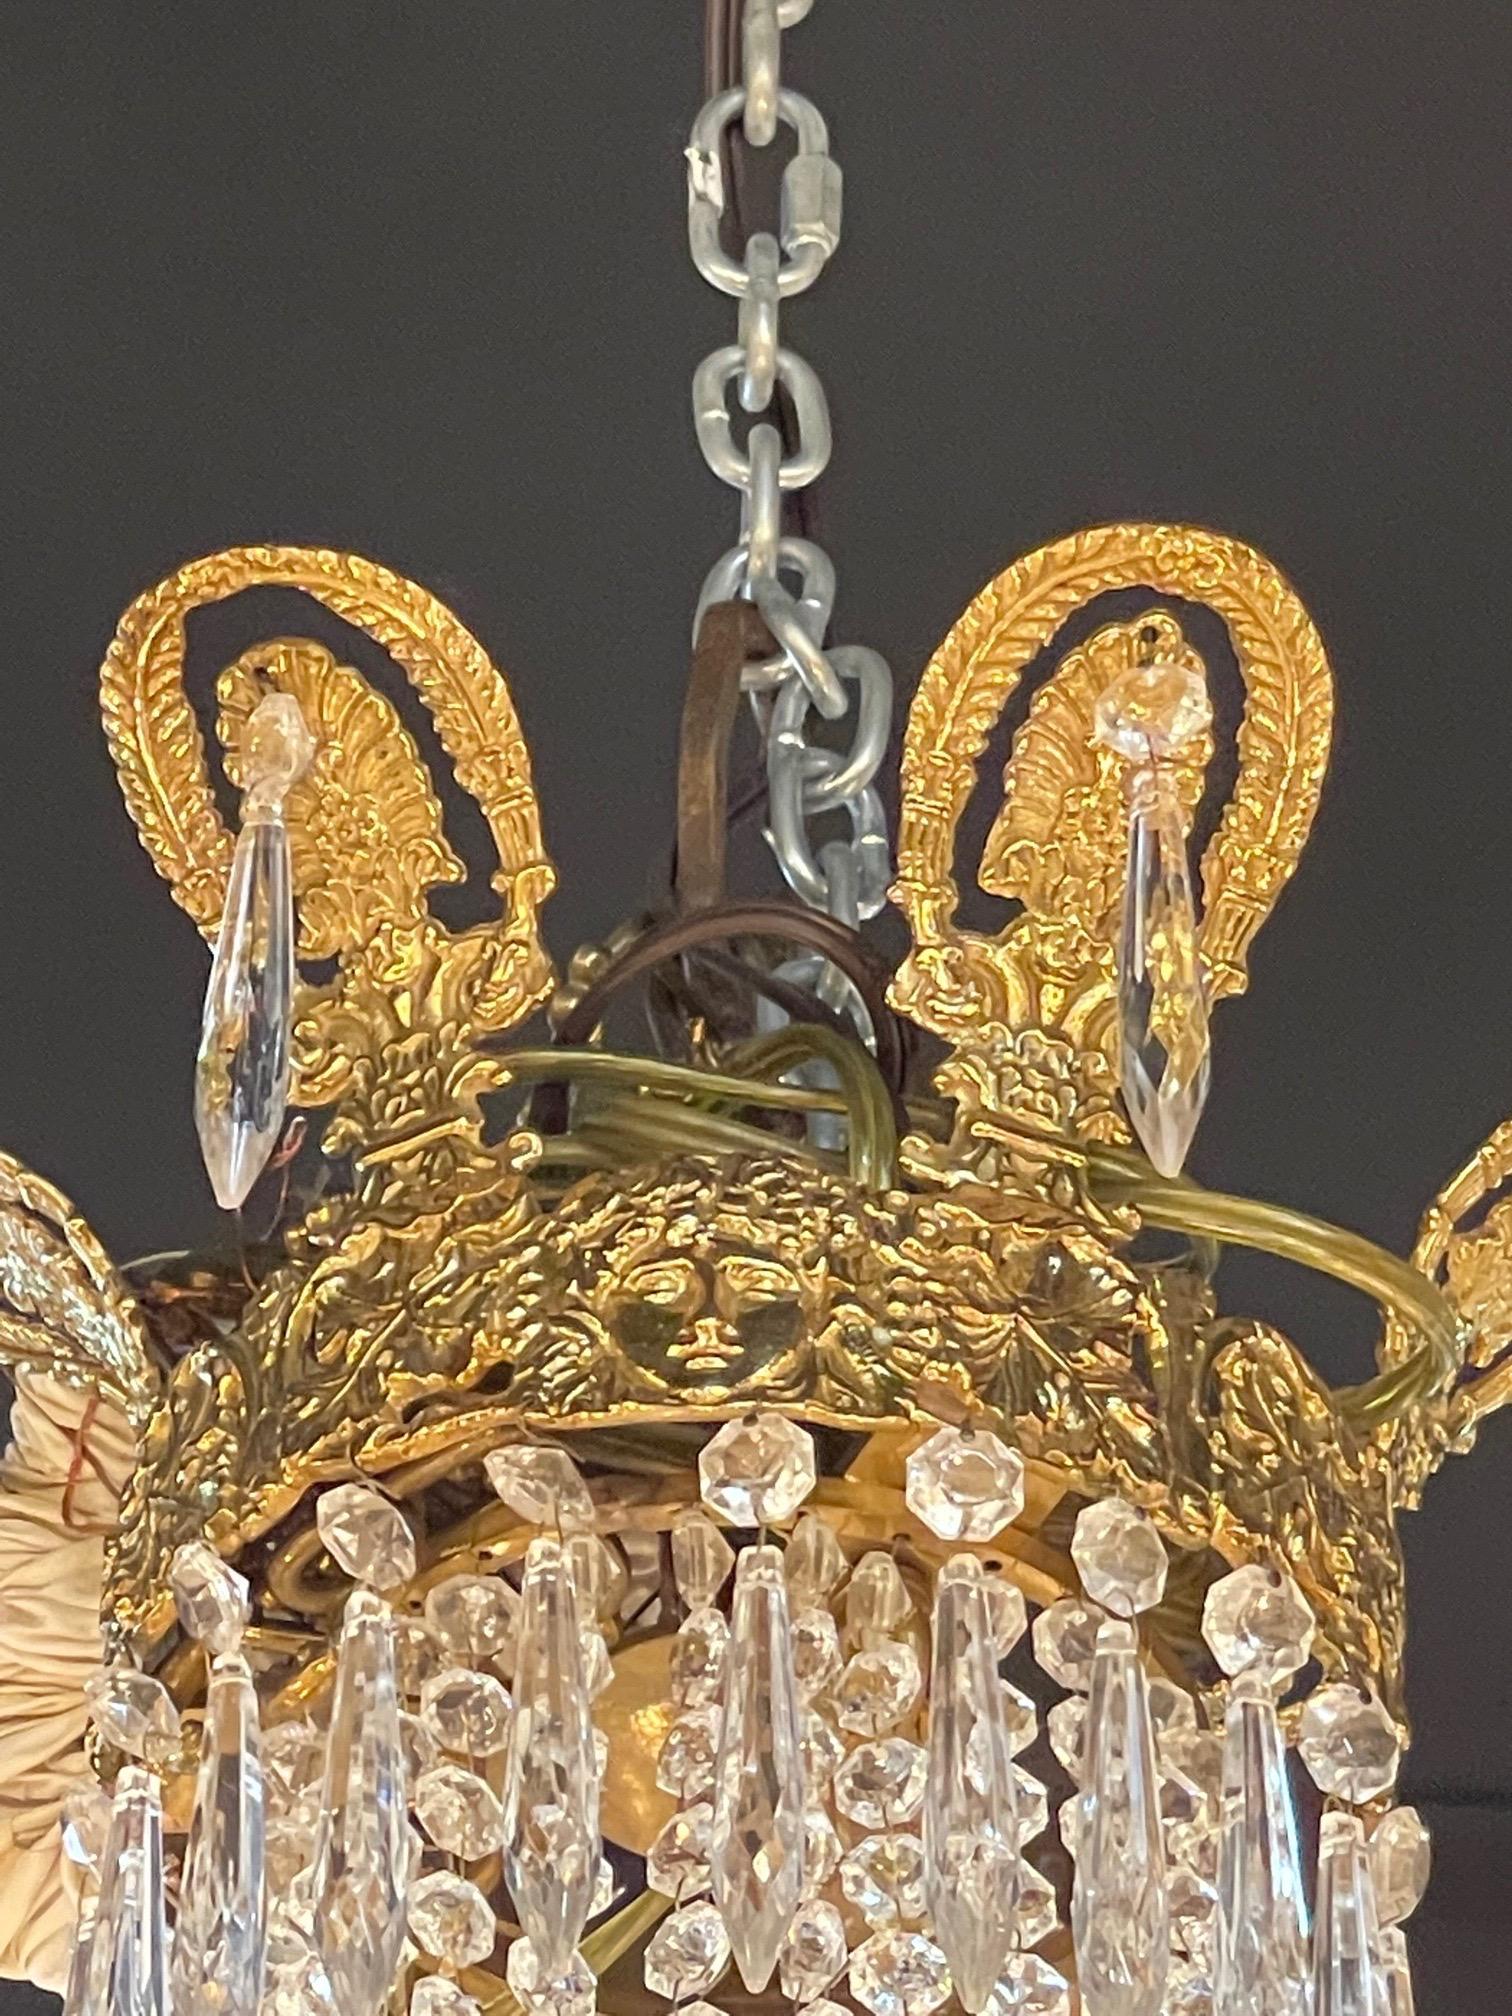 19th Century French Empire Style Gilt Bronze and Crystal Chandelier with 18 Lights